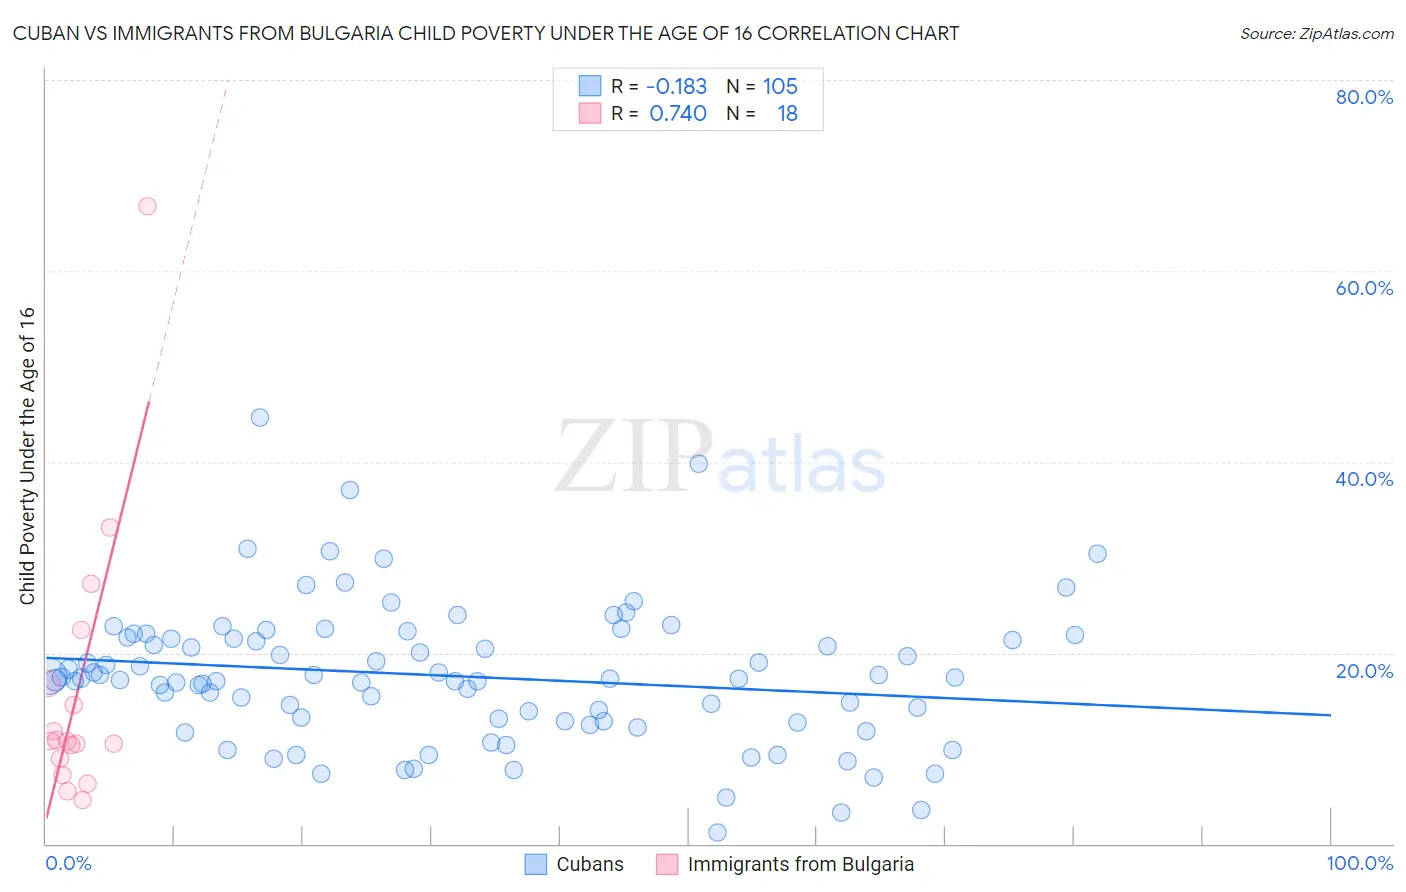 Cuban vs Immigrants from Bulgaria Child Poverty Under the Age of 16